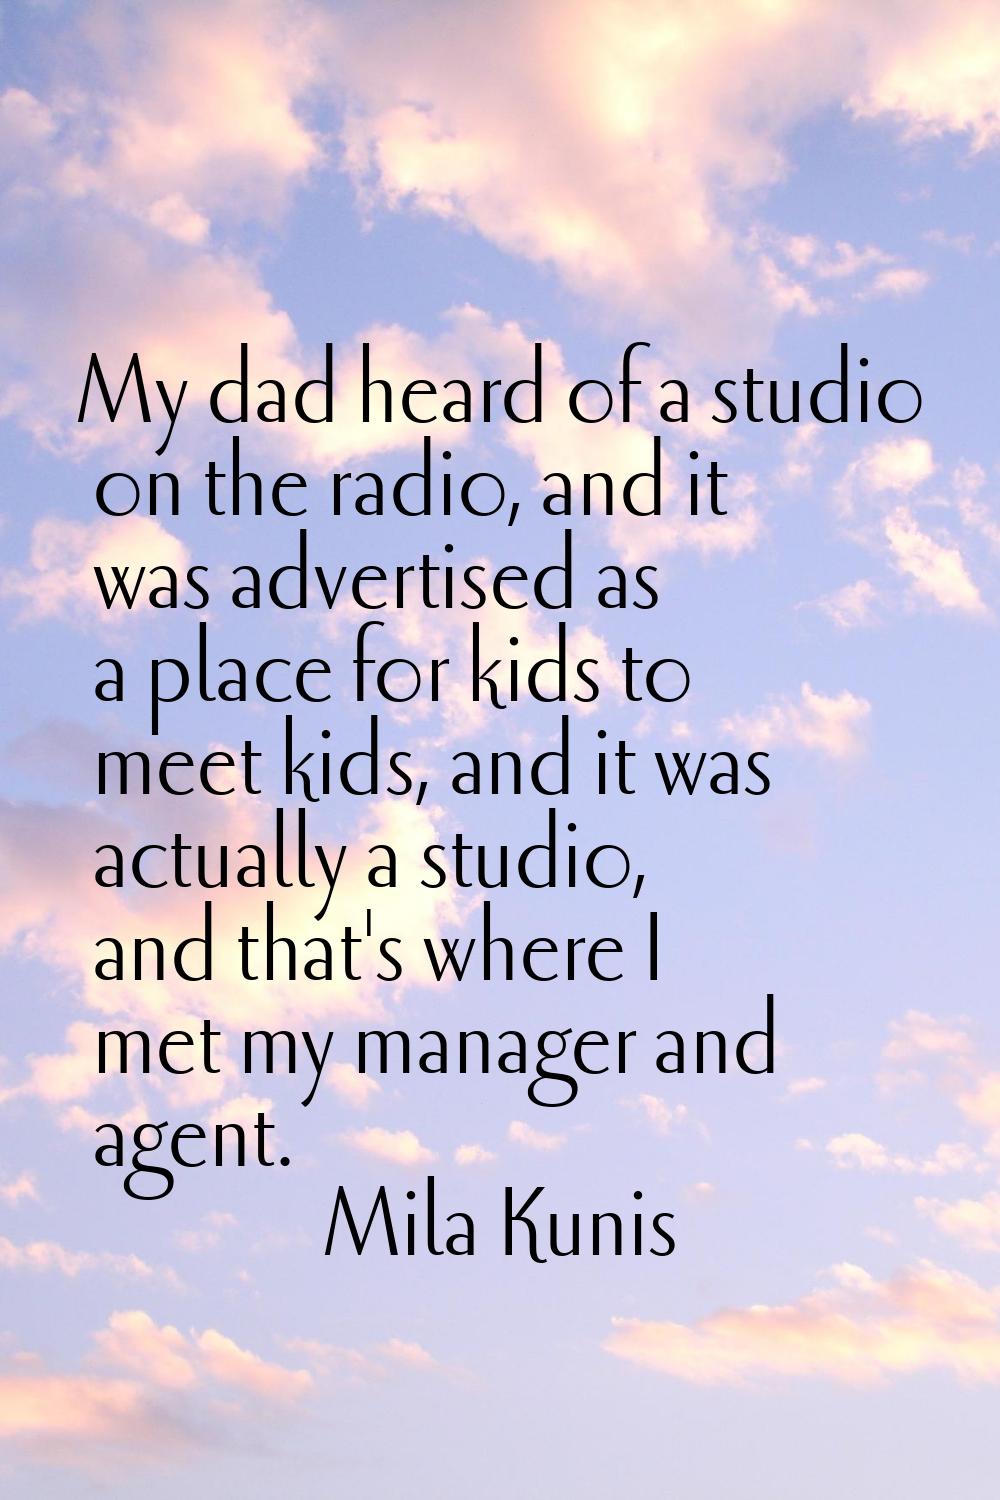 My dad heard of a studio on the radio, and it was advertised as a place for kids to meet kids, and 